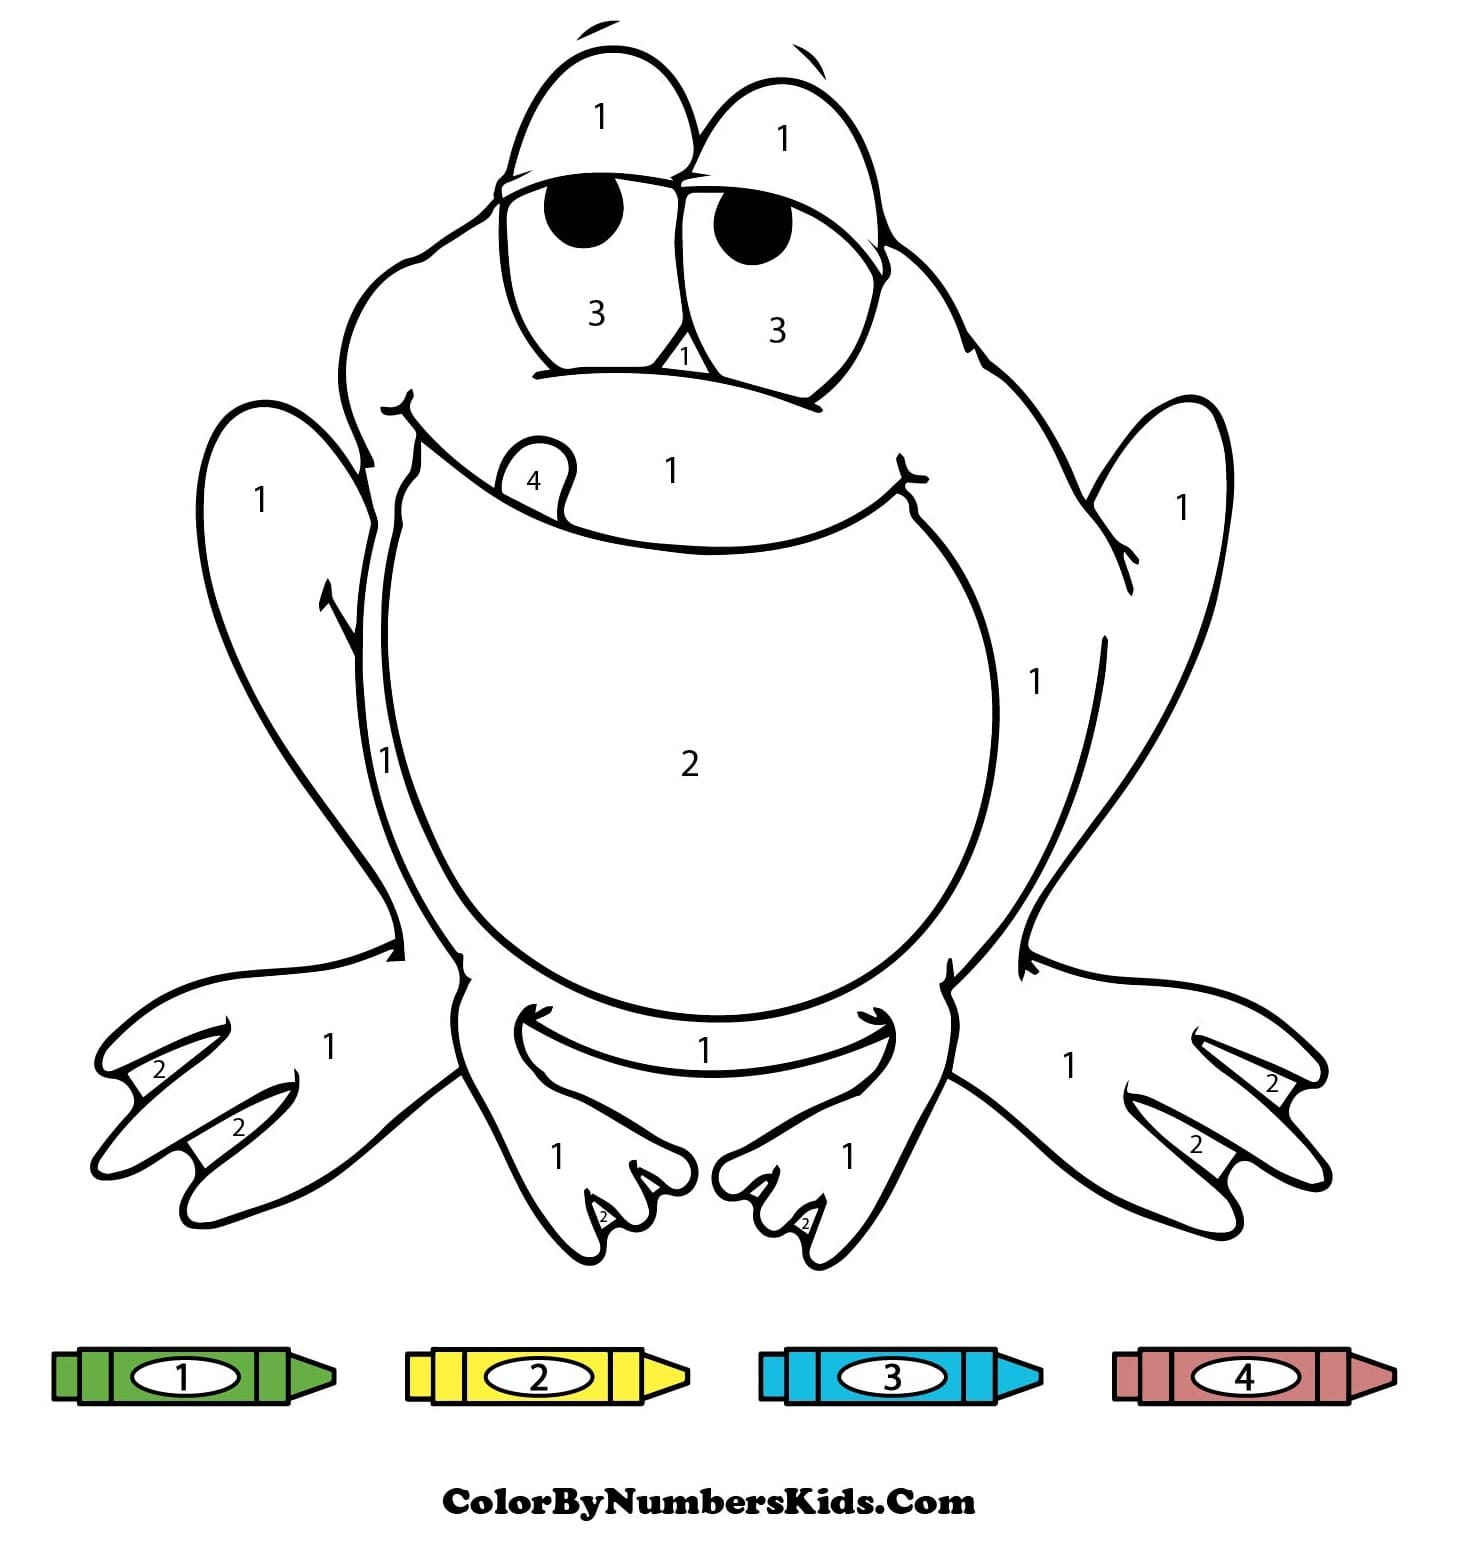 Cartoon Frog Color By Number